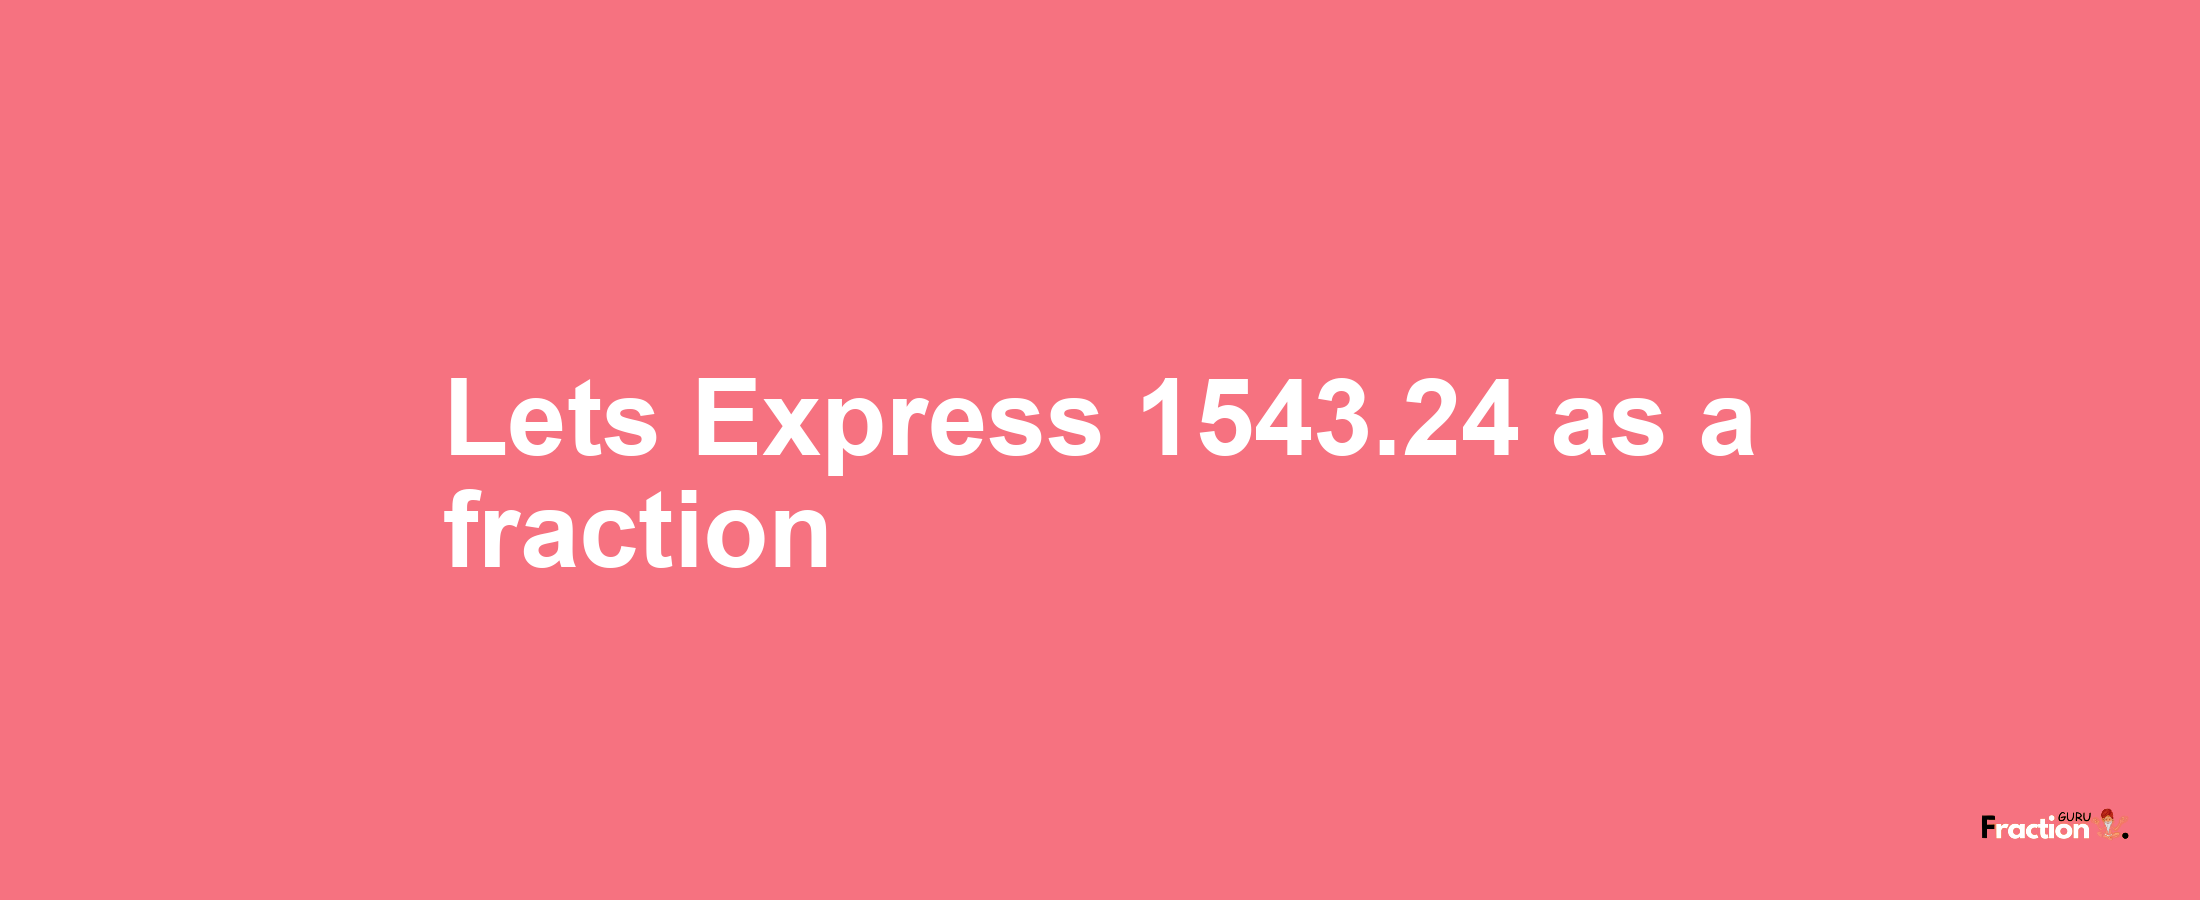 Lets Express 1543.24 as afraction